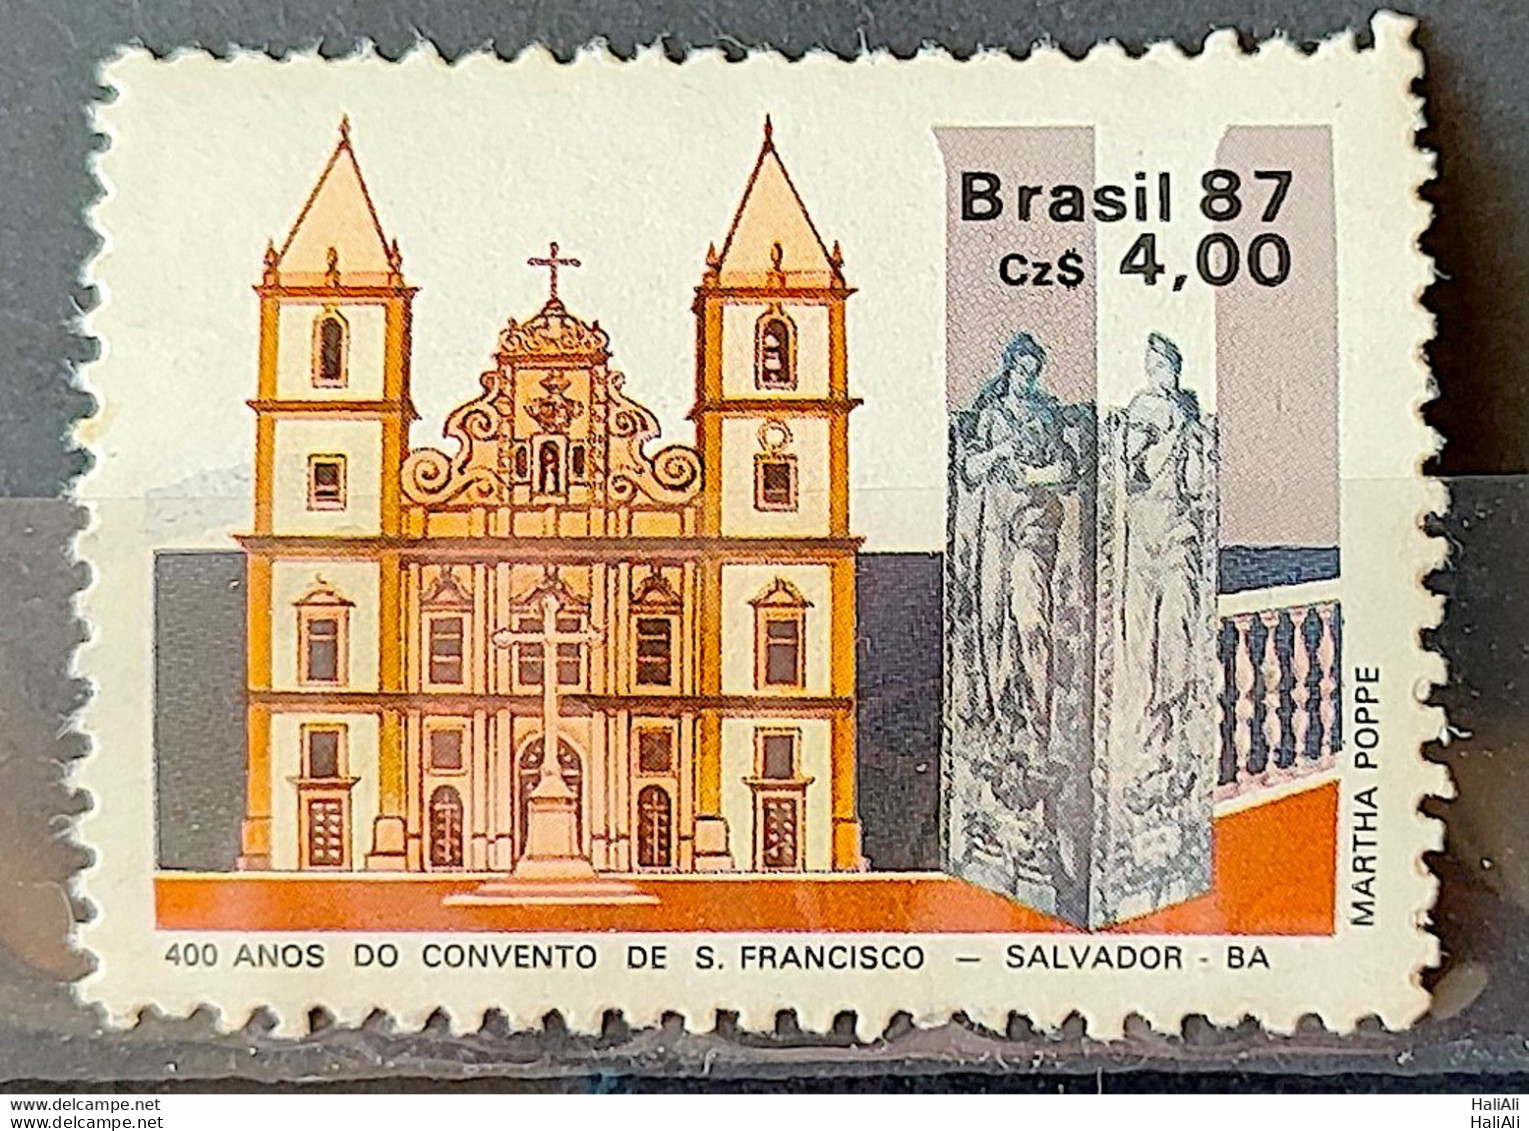 C 1563 Brazil Stamp 400 Years Convent Of Sao Francisco Salvador Bahia Religion Church 1987 - Unused Stamps